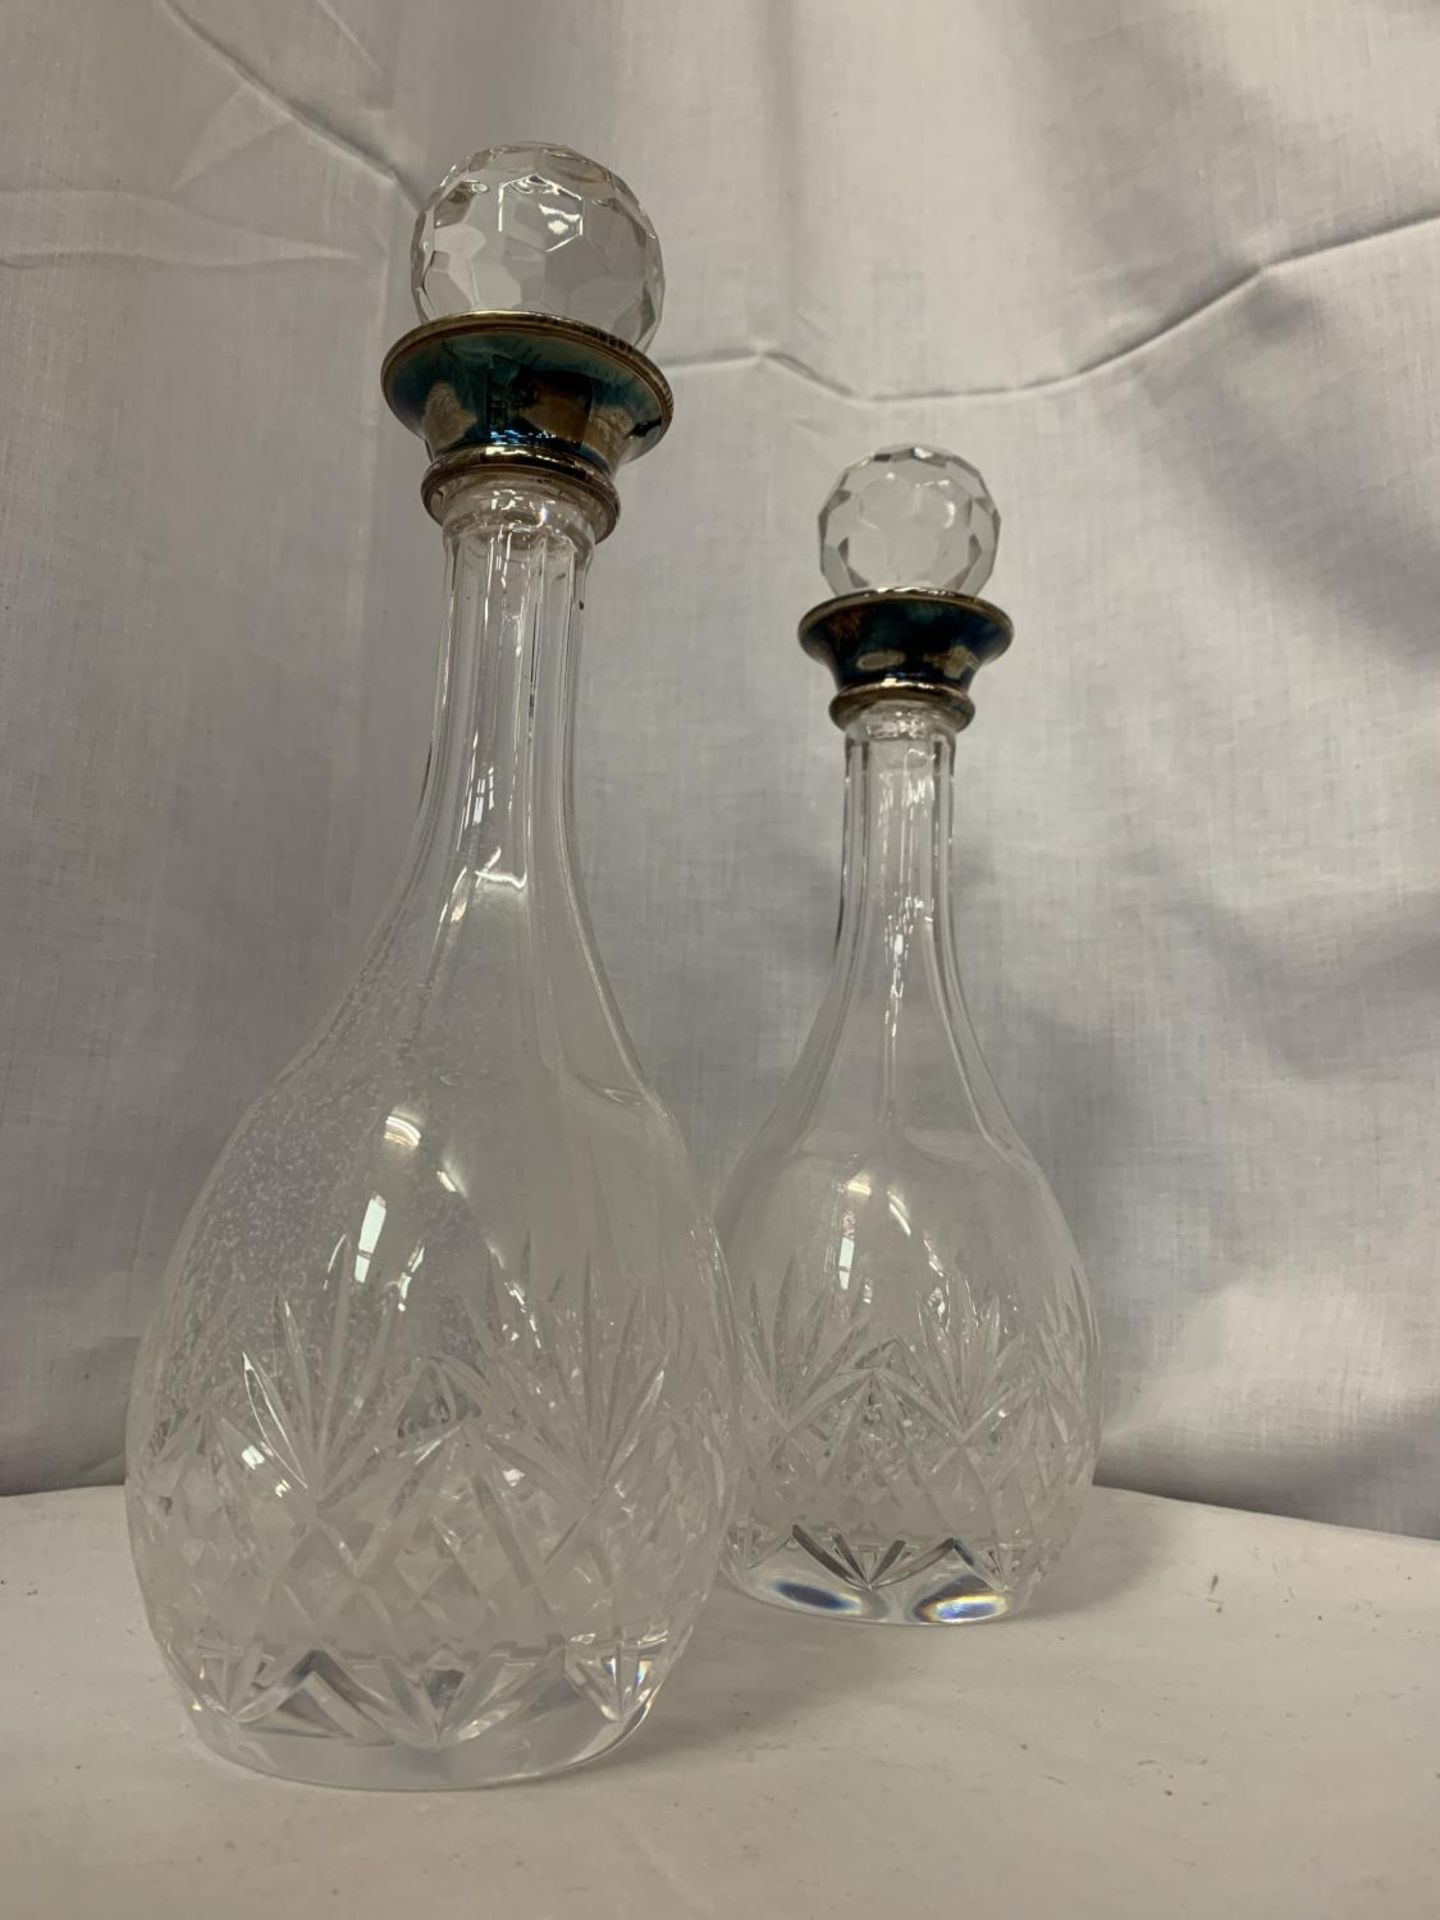 TWO MATCHING GLASS DECANTERS WITH HALLMARKED SILVER COLLARS AND GLASS STOPPERS - Image 3 of 3